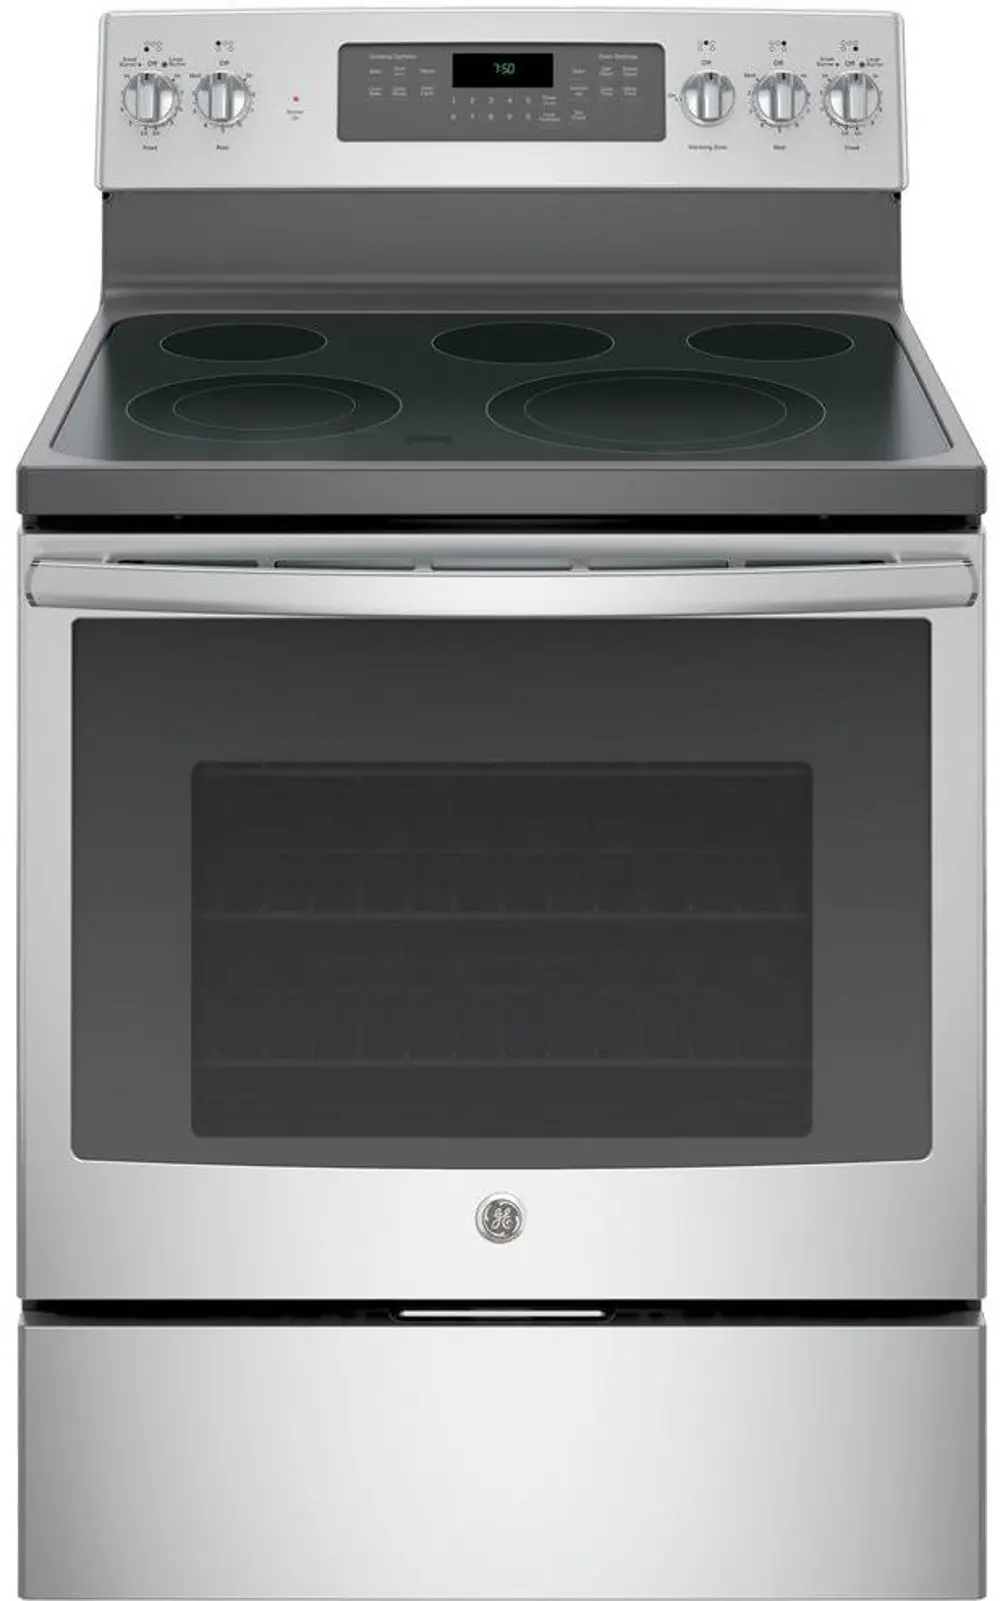 JB750SJSS GE 30 Inch Electric Range with Fast Preheat - 5.3 cu. ft. Stainless Steel-1